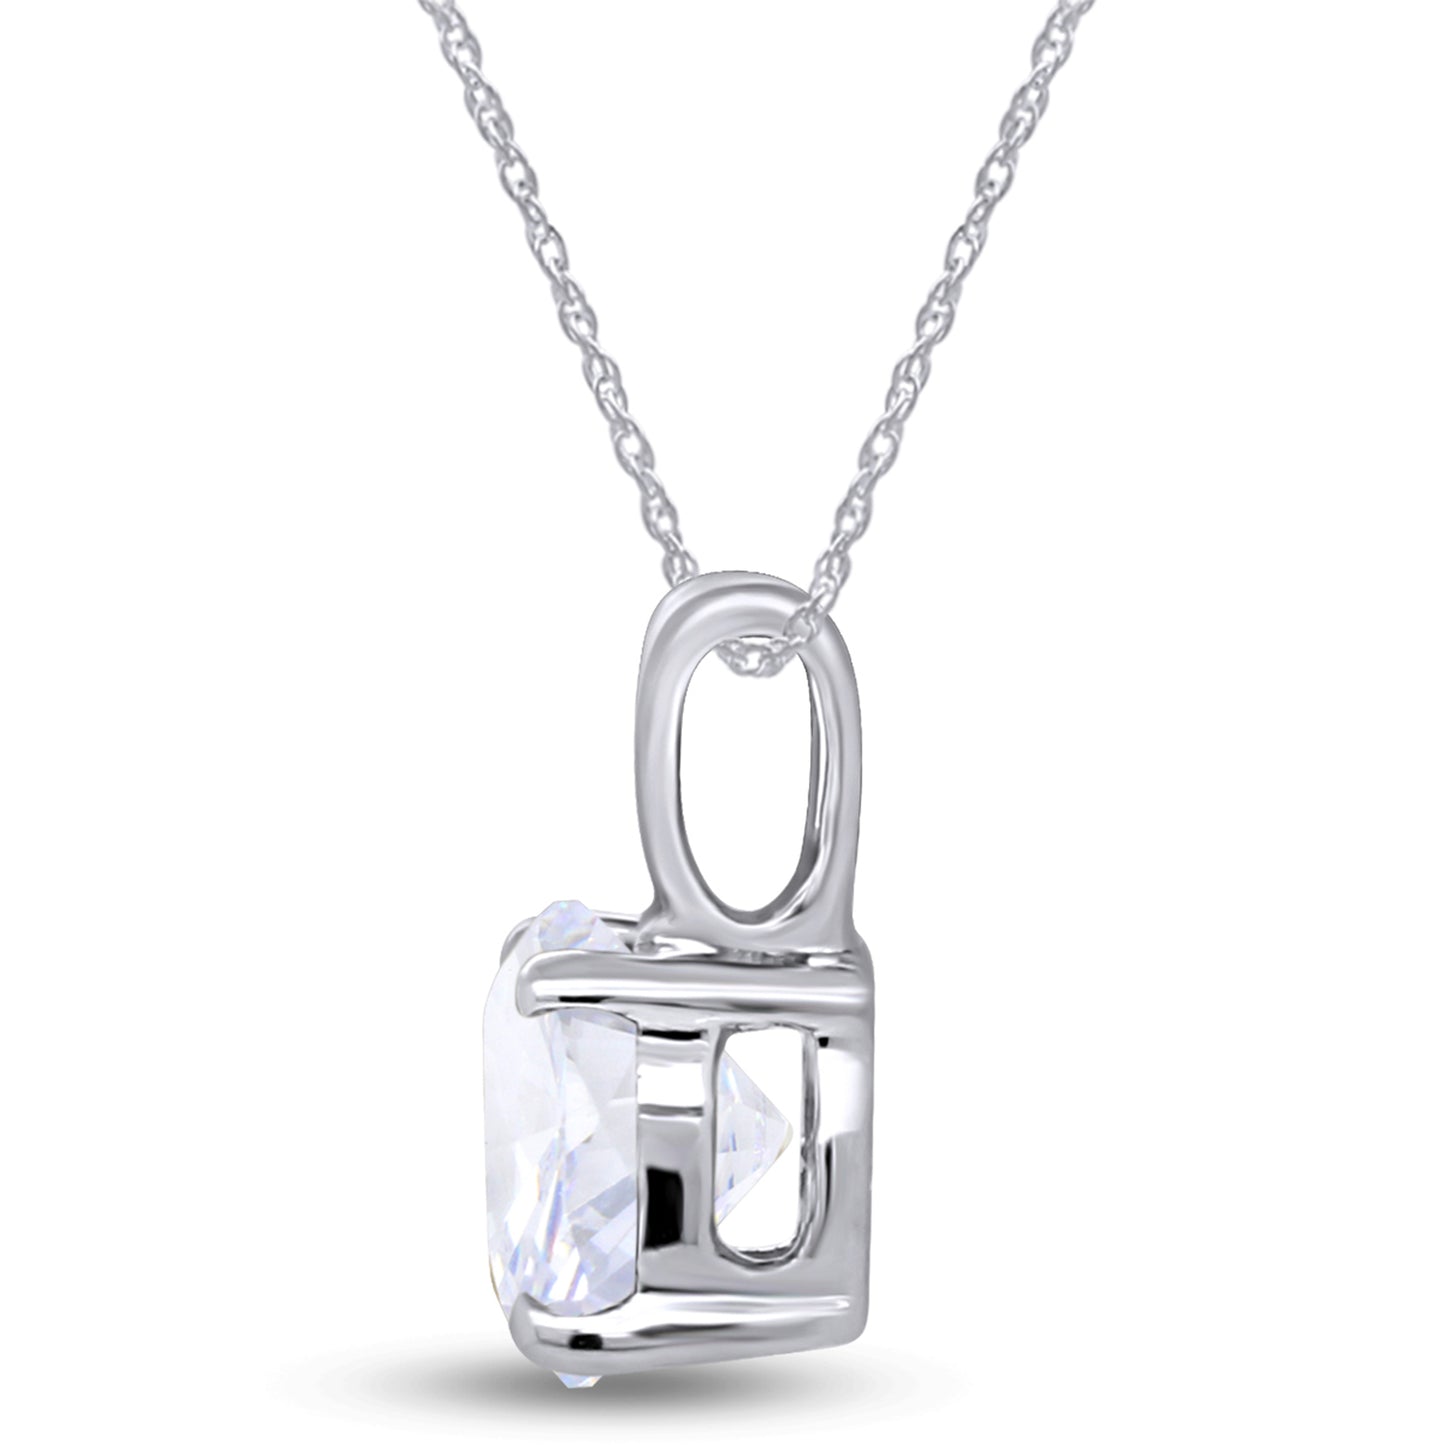 1 Carat 6.5MM Round Cut Lab Created Moissanite Diamond Solitaire Pendant Necklace In 925 Sterling Silver (1 Cttw)